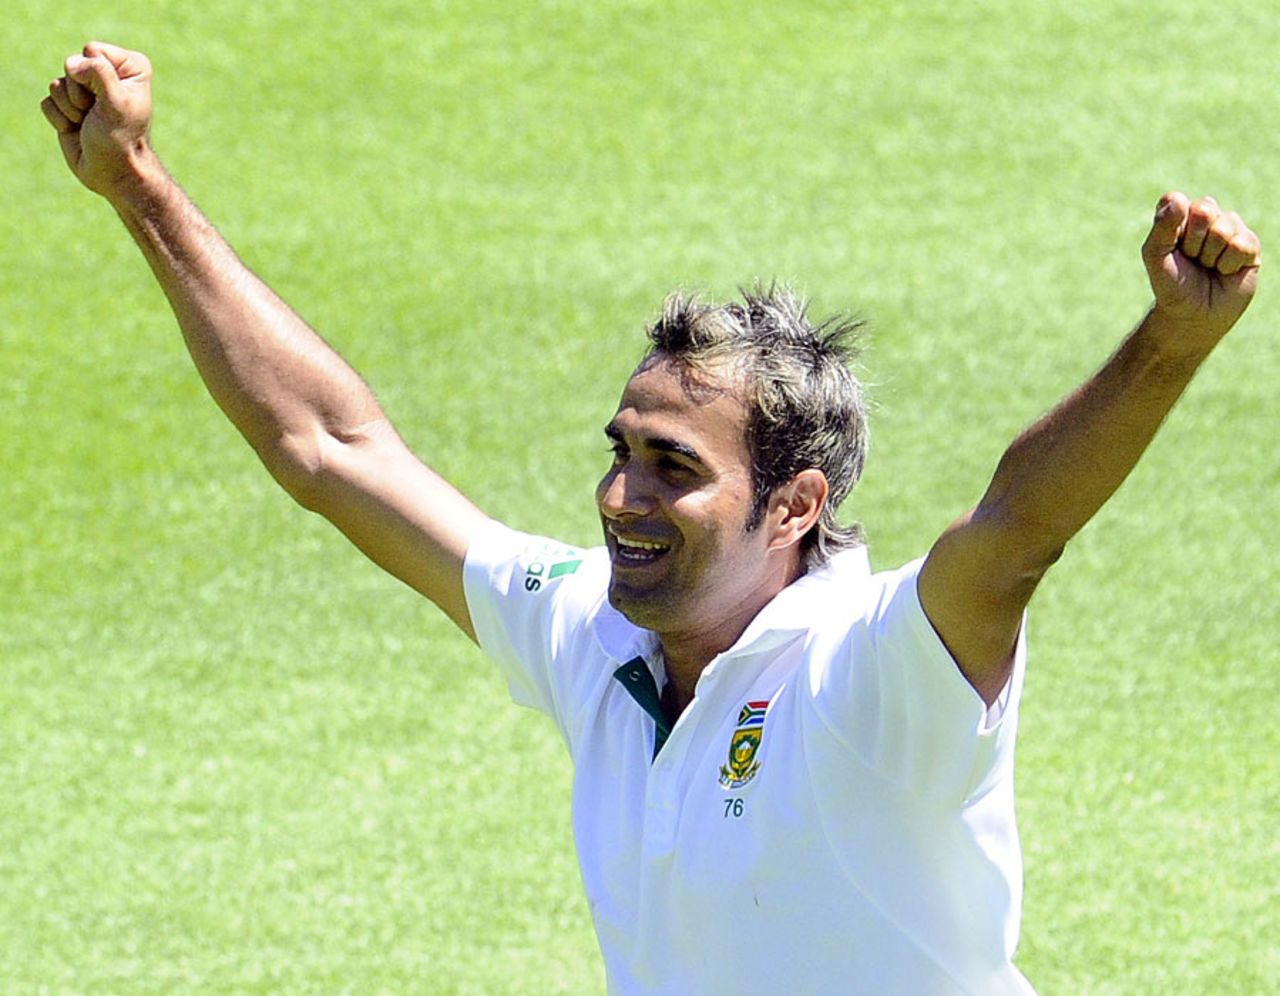 Imran Tahir celebrates one of his three wickets, South Africa v Sri Lanka, 3rd Test, Cape Town, 4th day, January 6, 2012